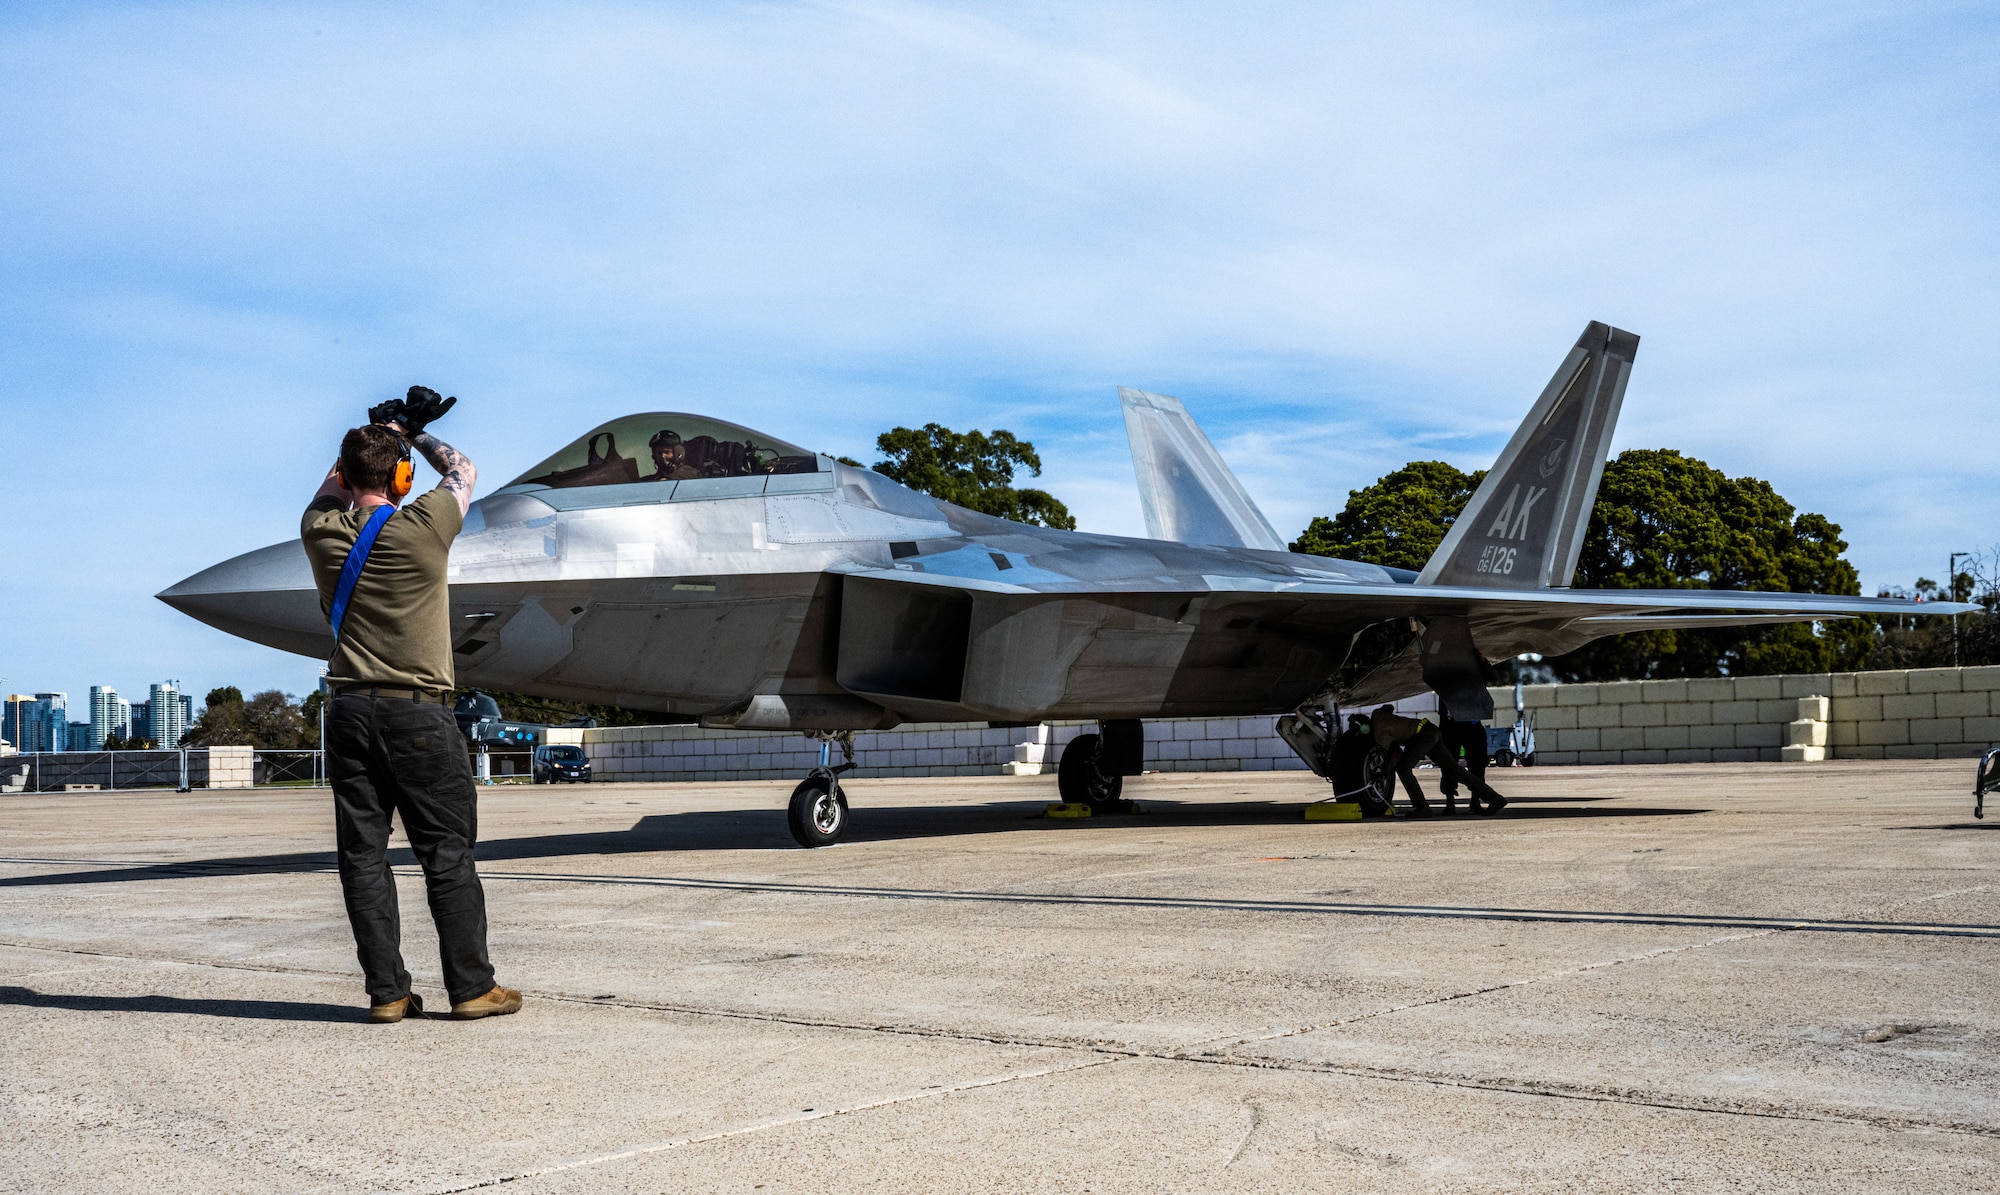 A U.S. Air Force crew chief deployed with the 525th Expeditionary Fighter Generation Squadron, 3rd Air Expeditionary Wing, Joint Base Elmendorf-Richardson, Alaska, marshals an F-22 Raptor during Exercise Bamboo Eagle 24-1 at Naval Air Station North Island, California, Jan. 28, 2024.